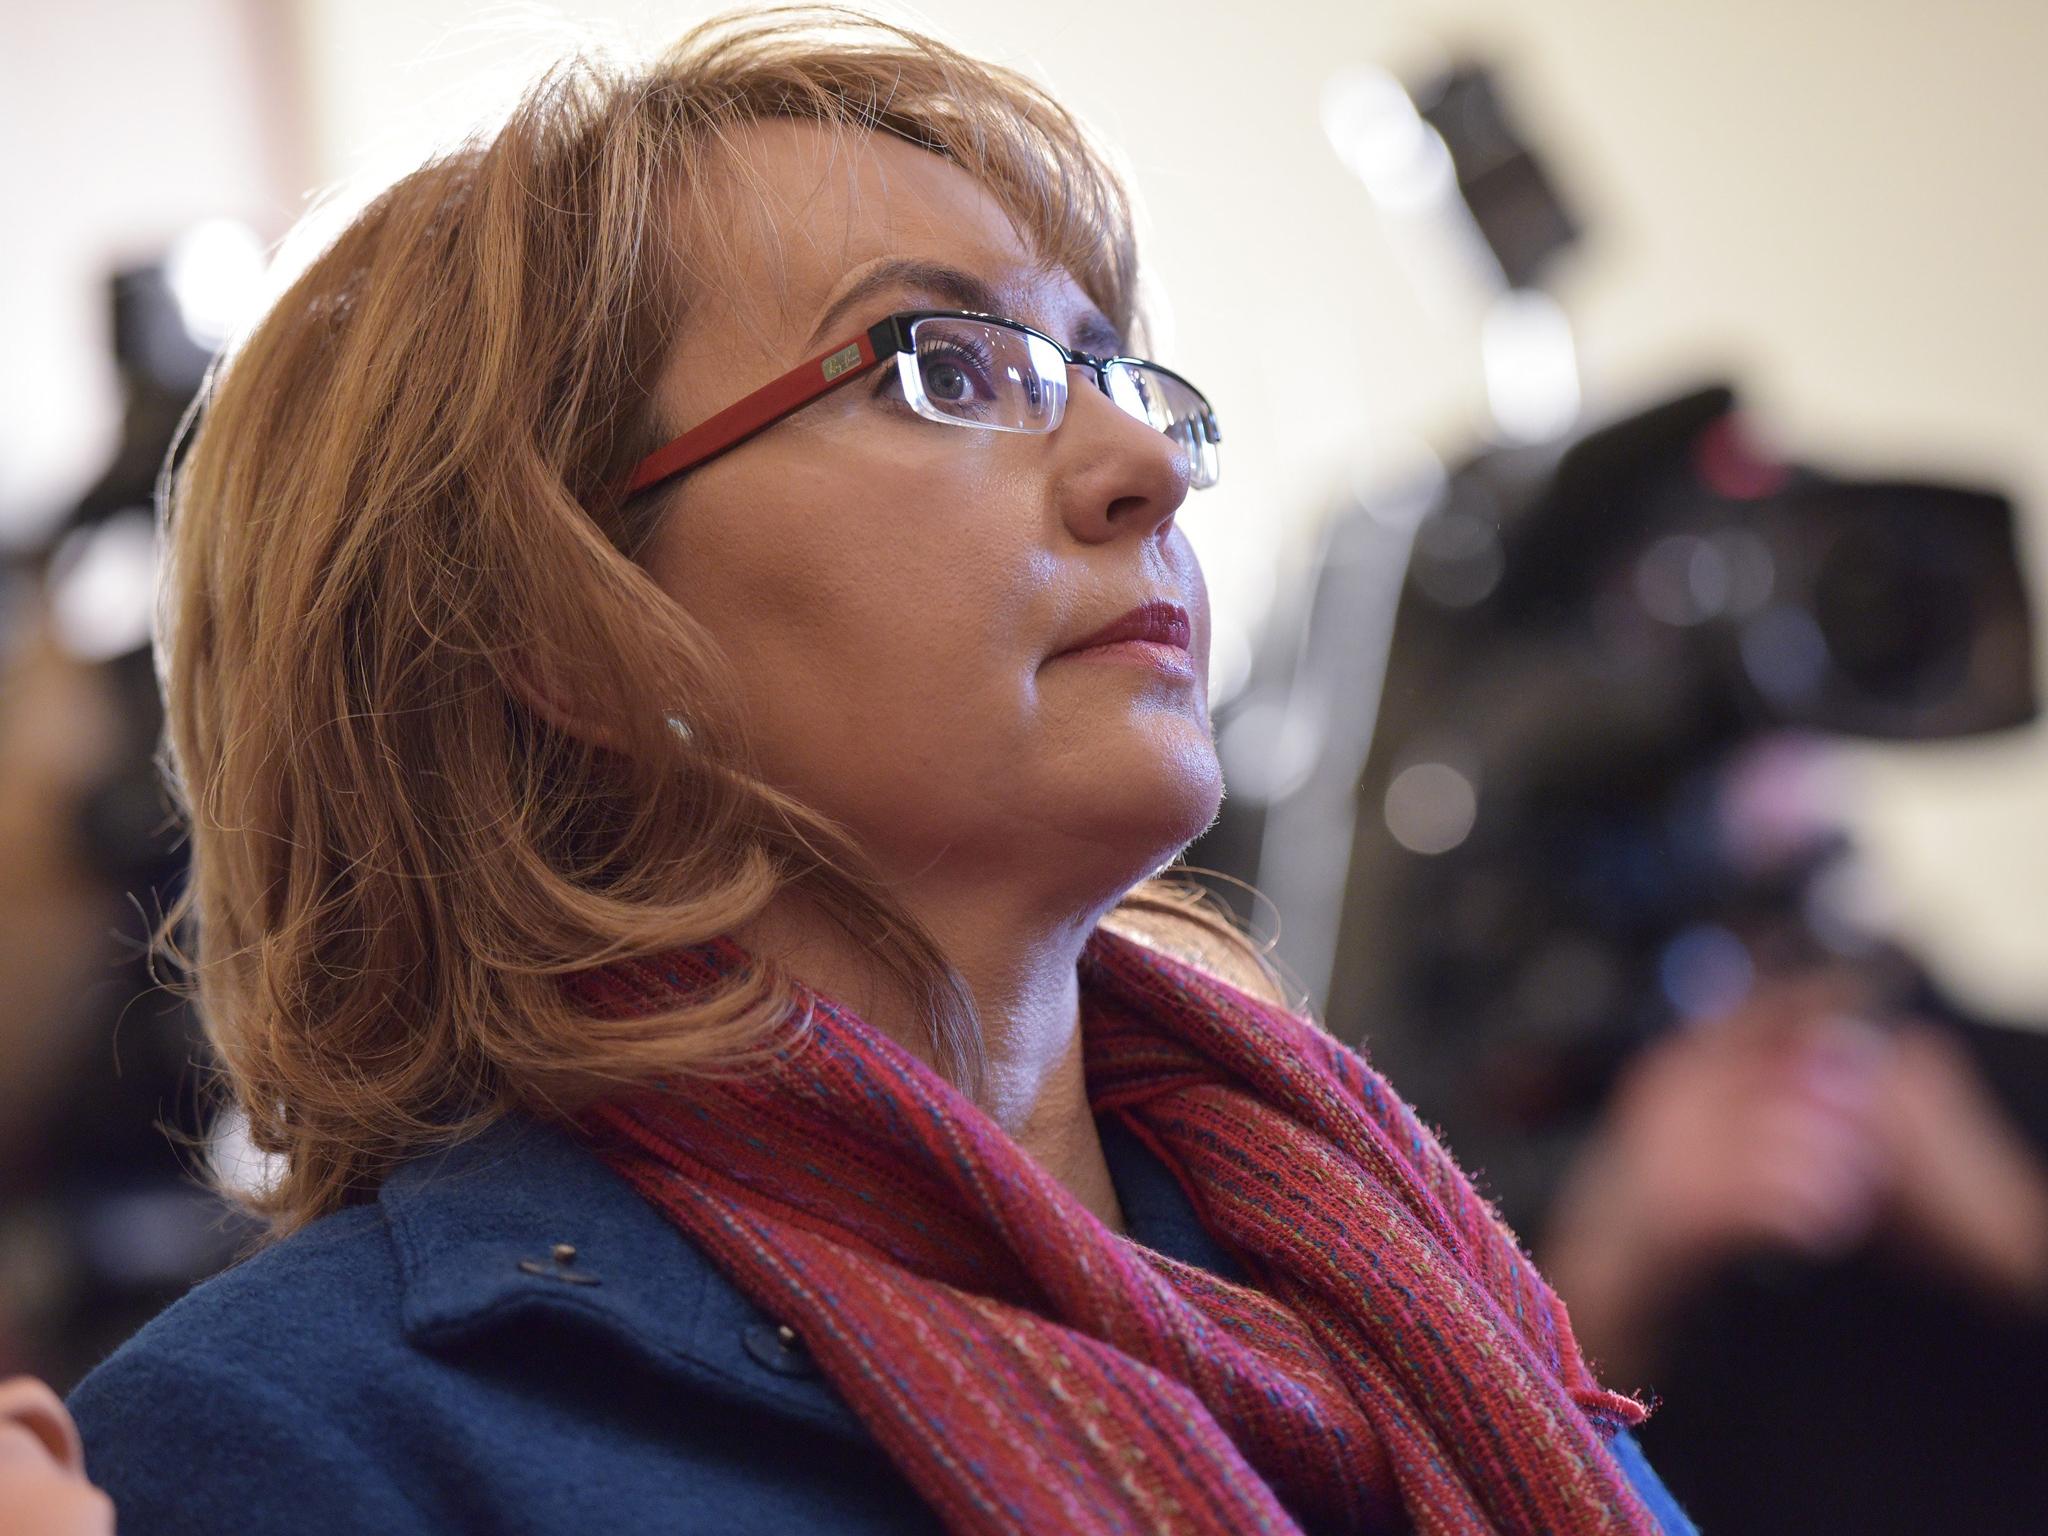 Since her survival, Giffords has been an outspoken proponent of gun control Mandel Ngad/Getty